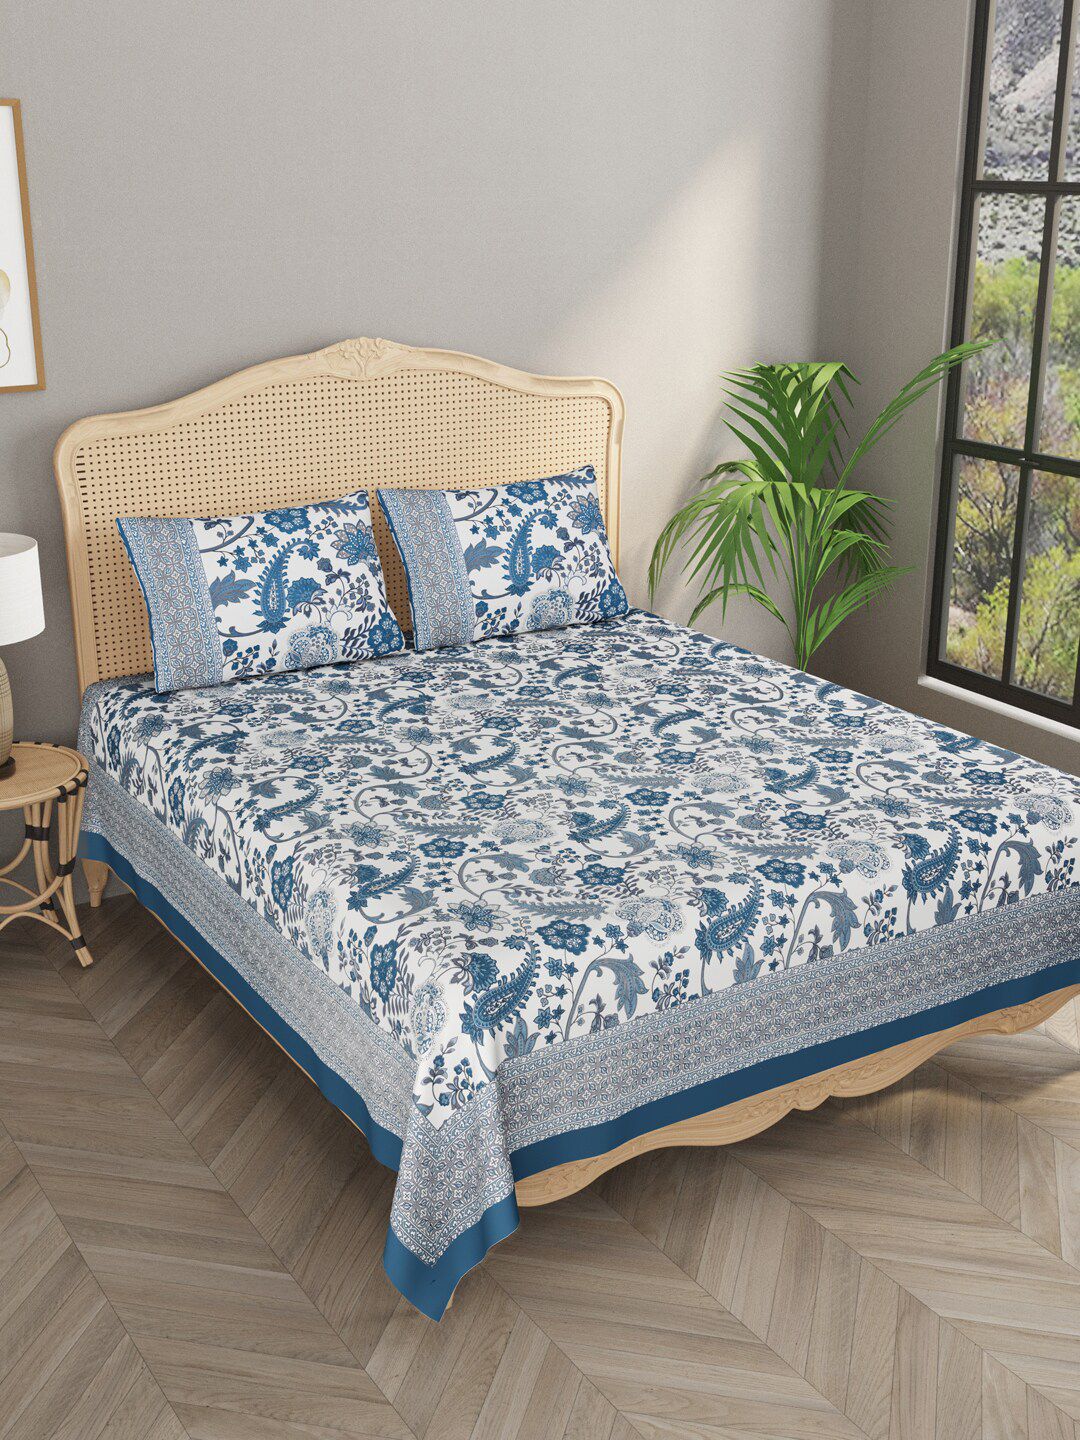 Gulaab Jaipur Blue & White Floral Cotton 600 TC Super King Bedsheet with 2 Pillow Covers Price in India